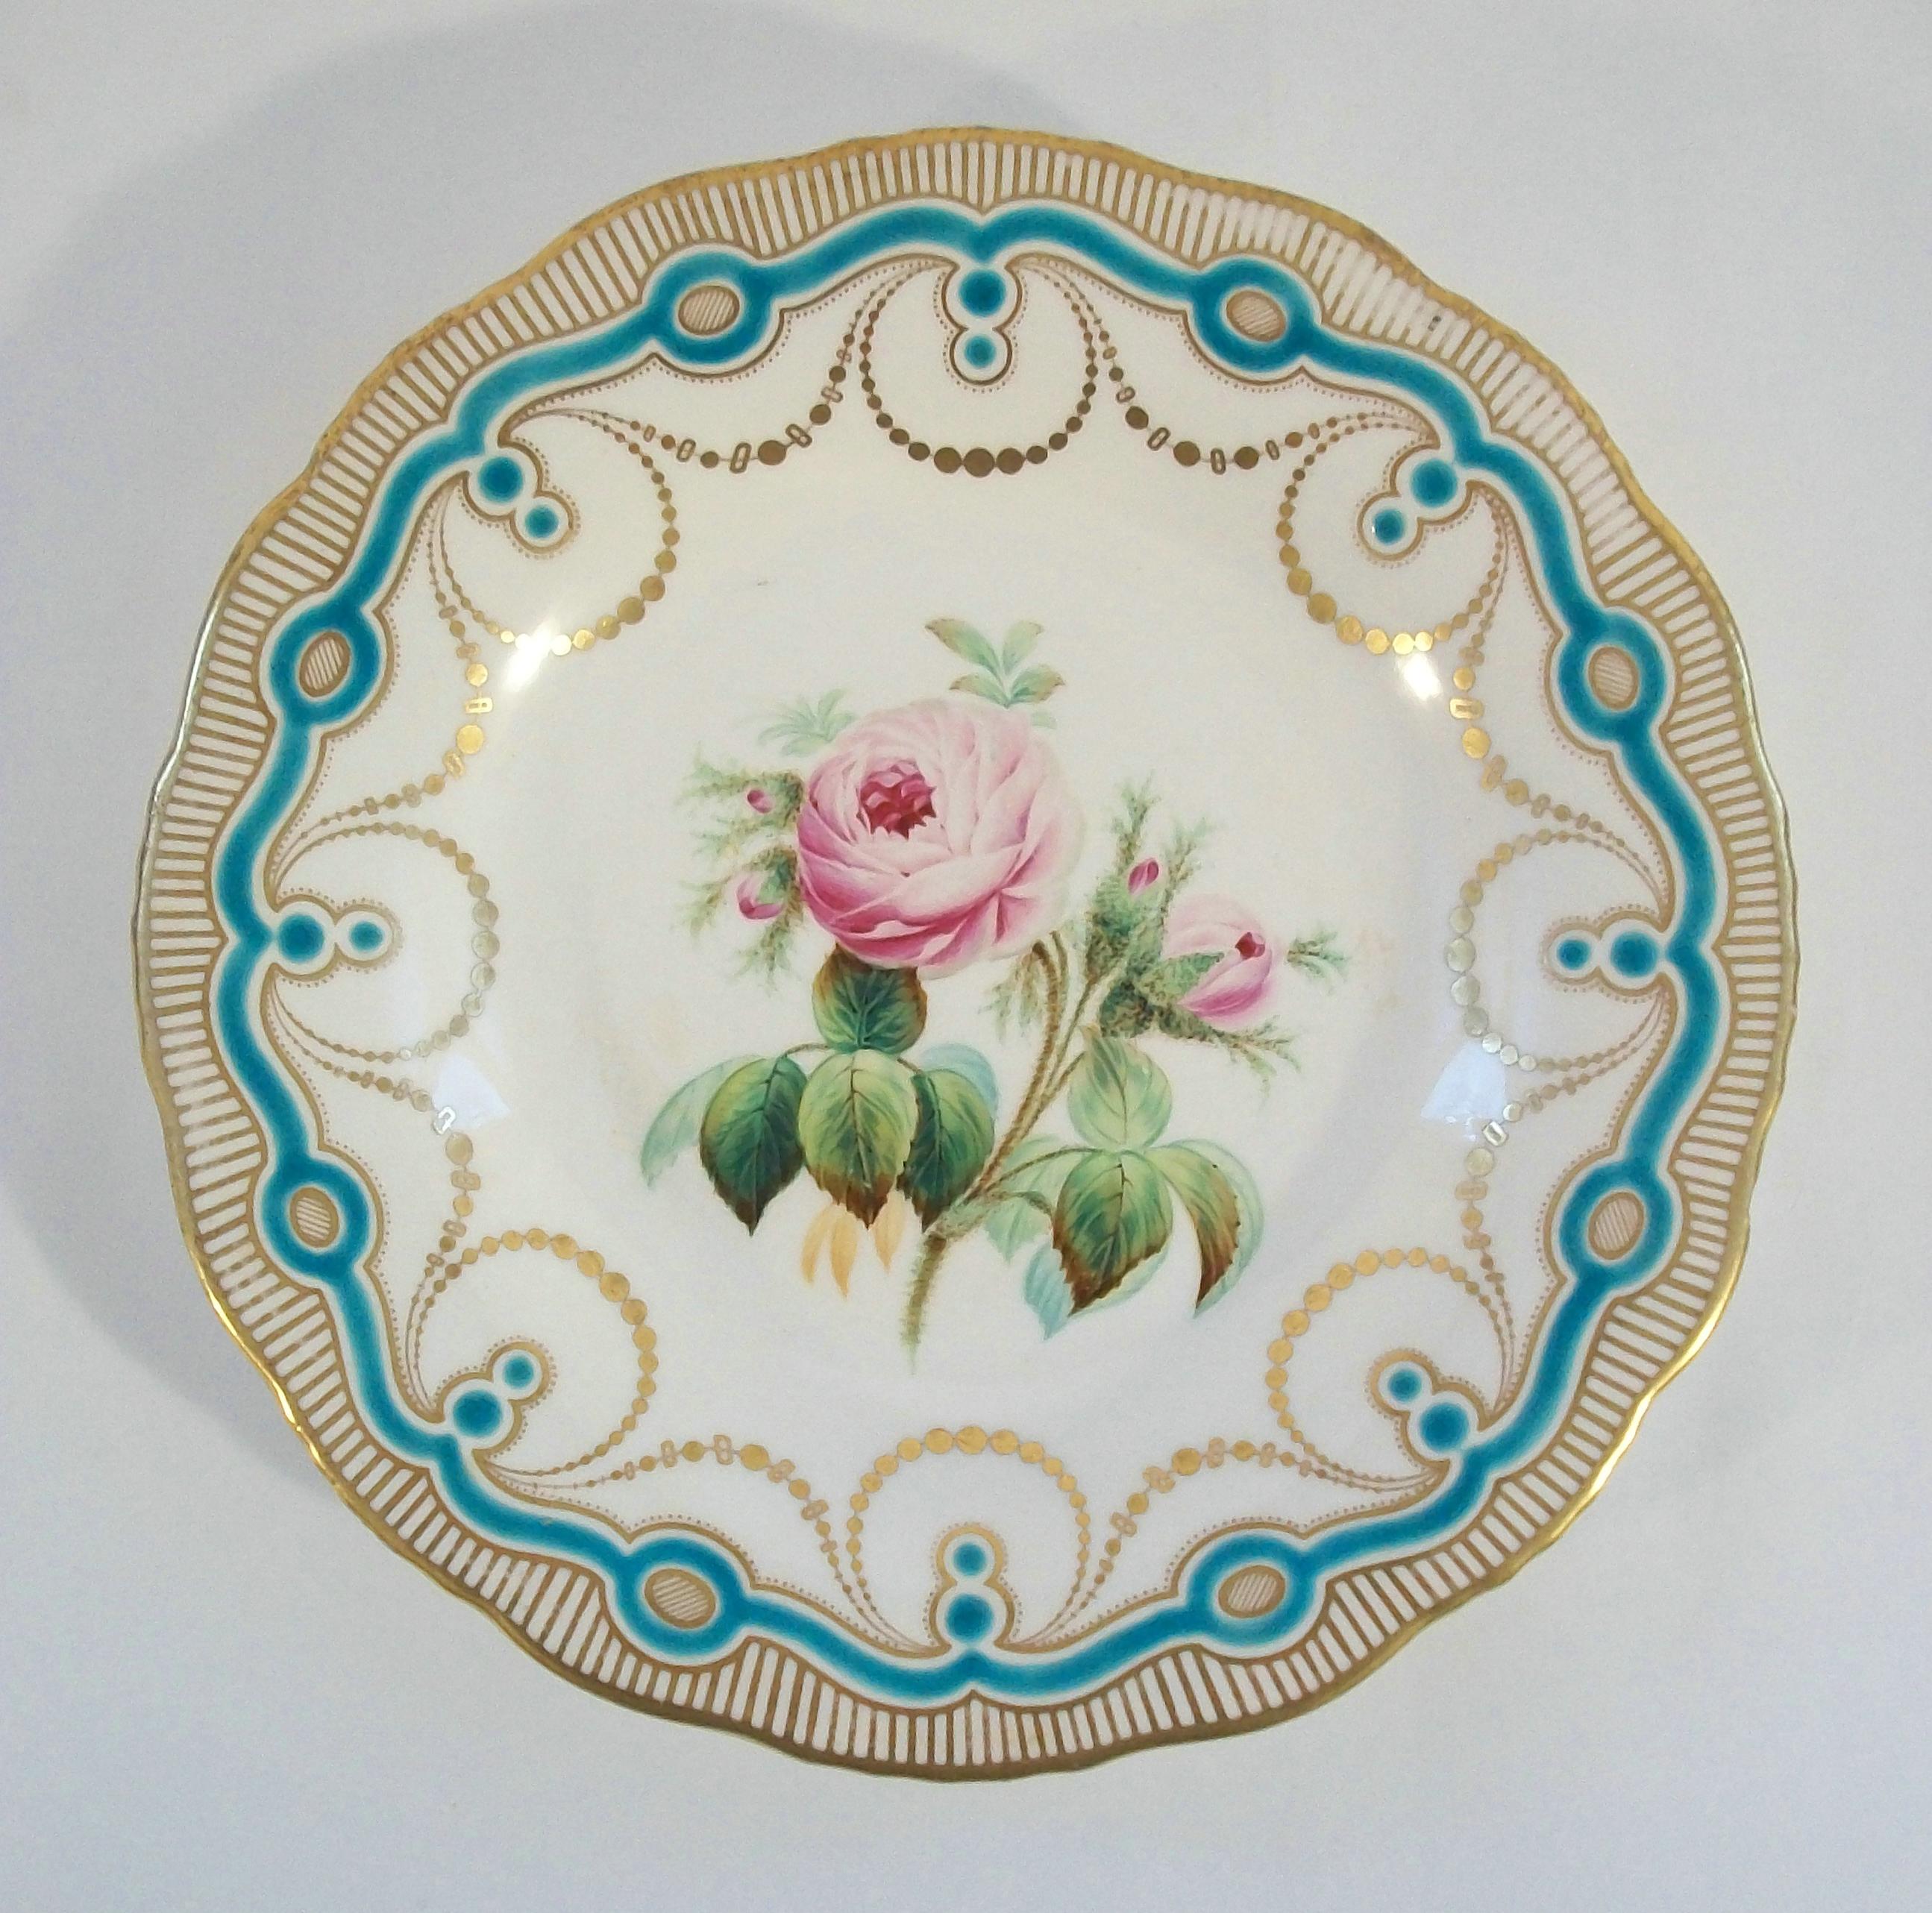 Antique English botanical ceramic cabinet plate - featuring a hand painted rose to the center and raised turquoise glaze pattern and gilding to the border - unsigned - United Kingdom - circa 1850's.

Excellent antique condition - rim chip to the